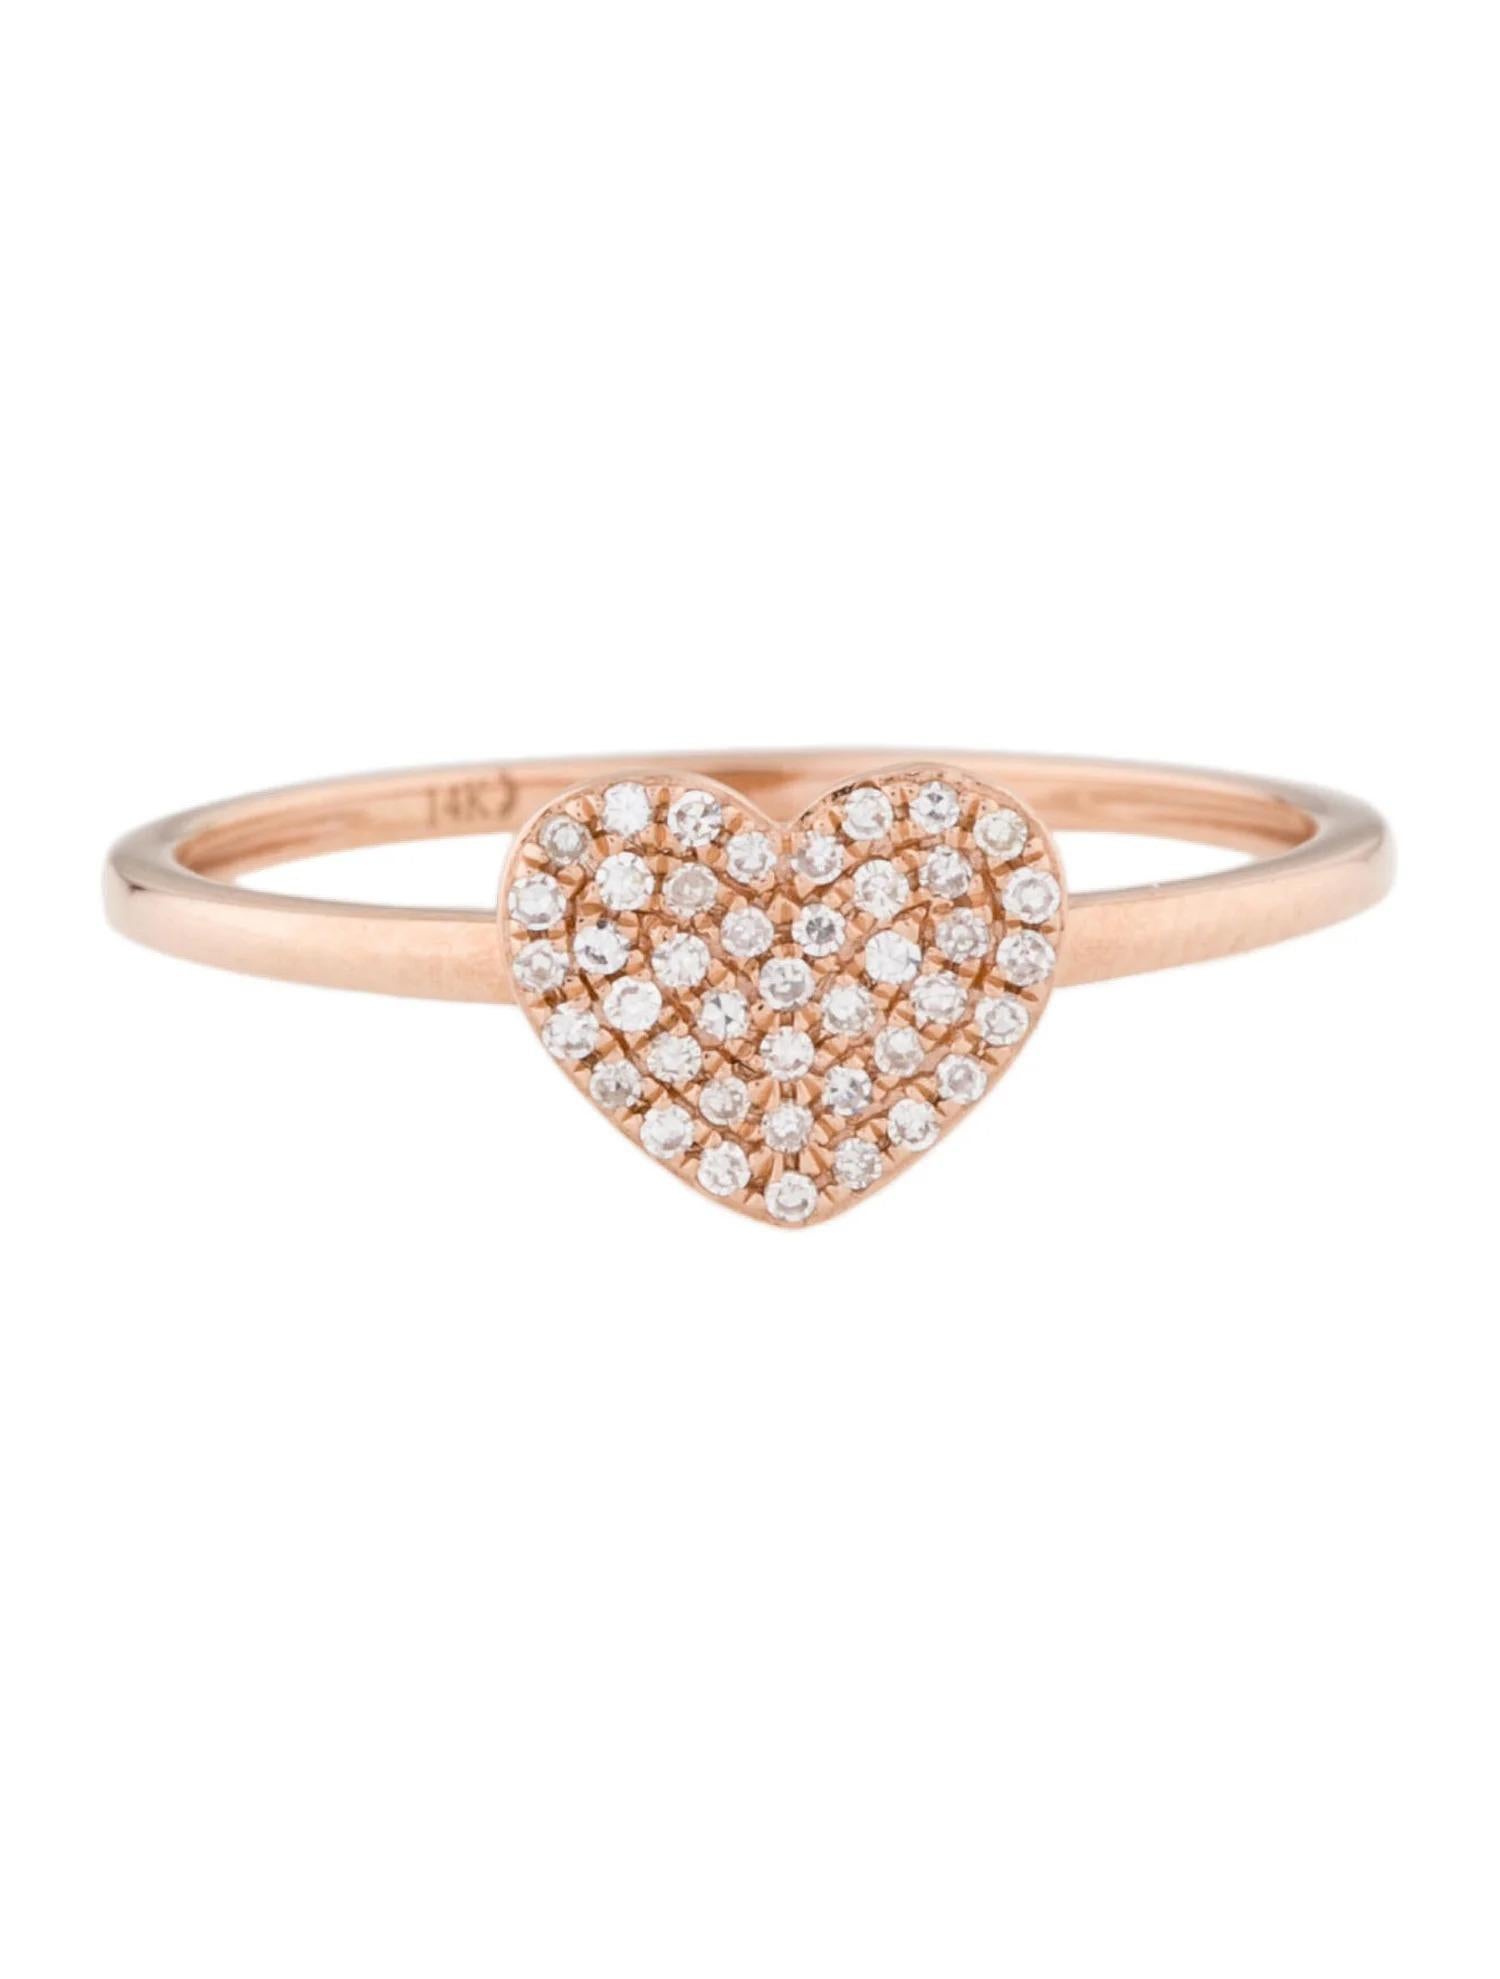 This stunning ring features a beautiful Heart Cluster of White Diamonds,.
This ring is set in 14K Rose Gold. Total Diamond Weight = 0.13 Carats. Ring Size is 6 1/2.